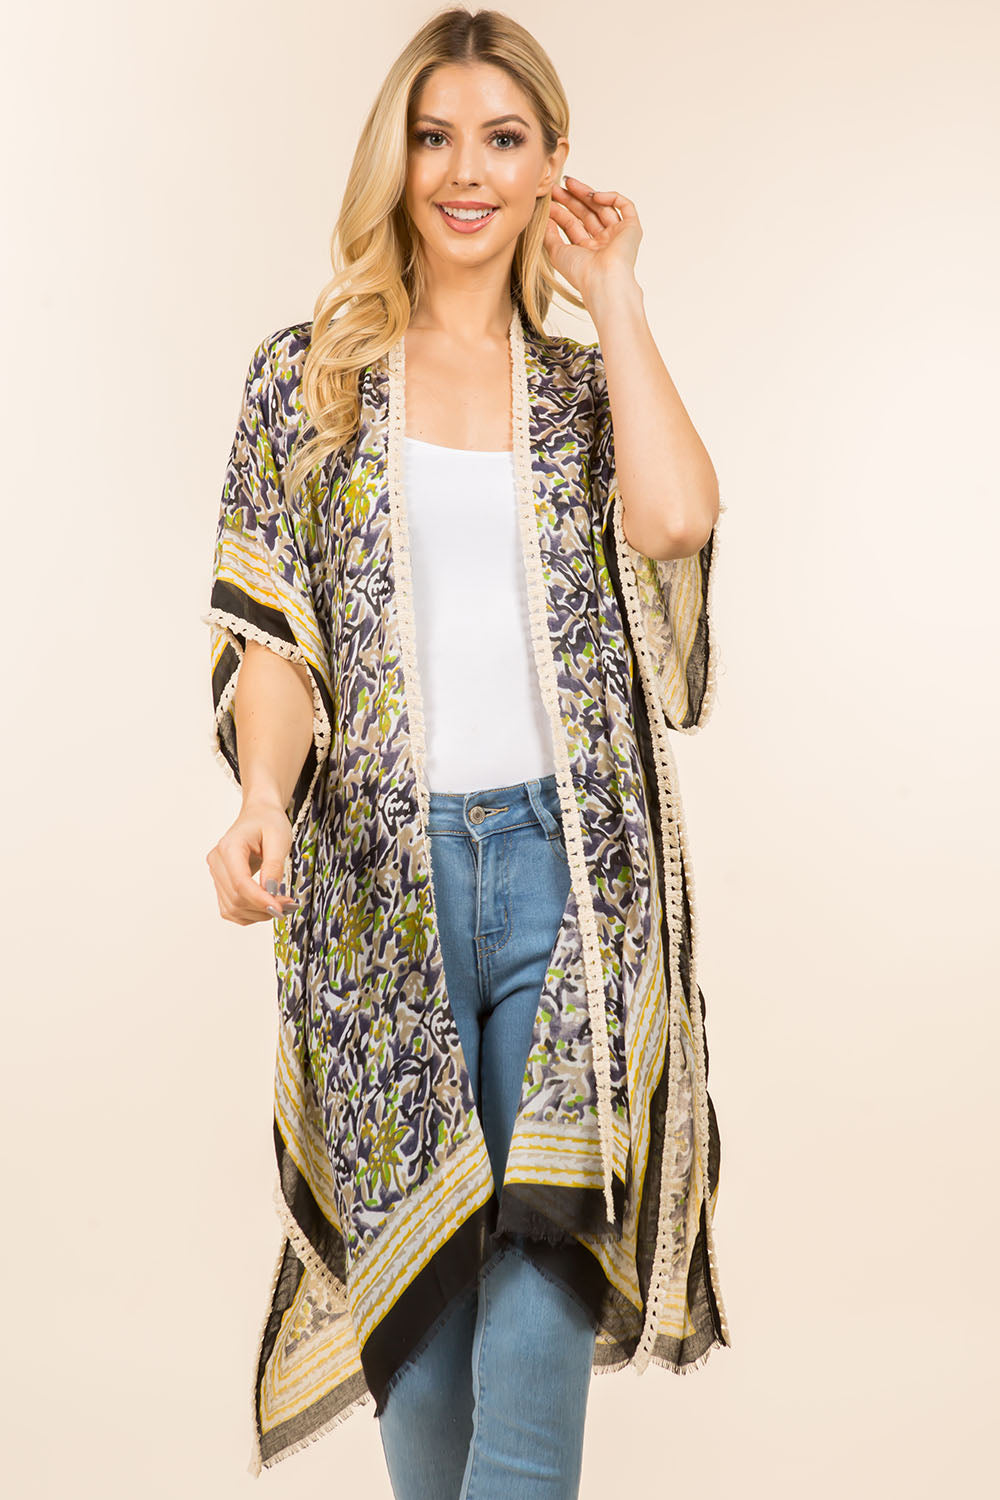 KP-4007 floral kimono with tassels